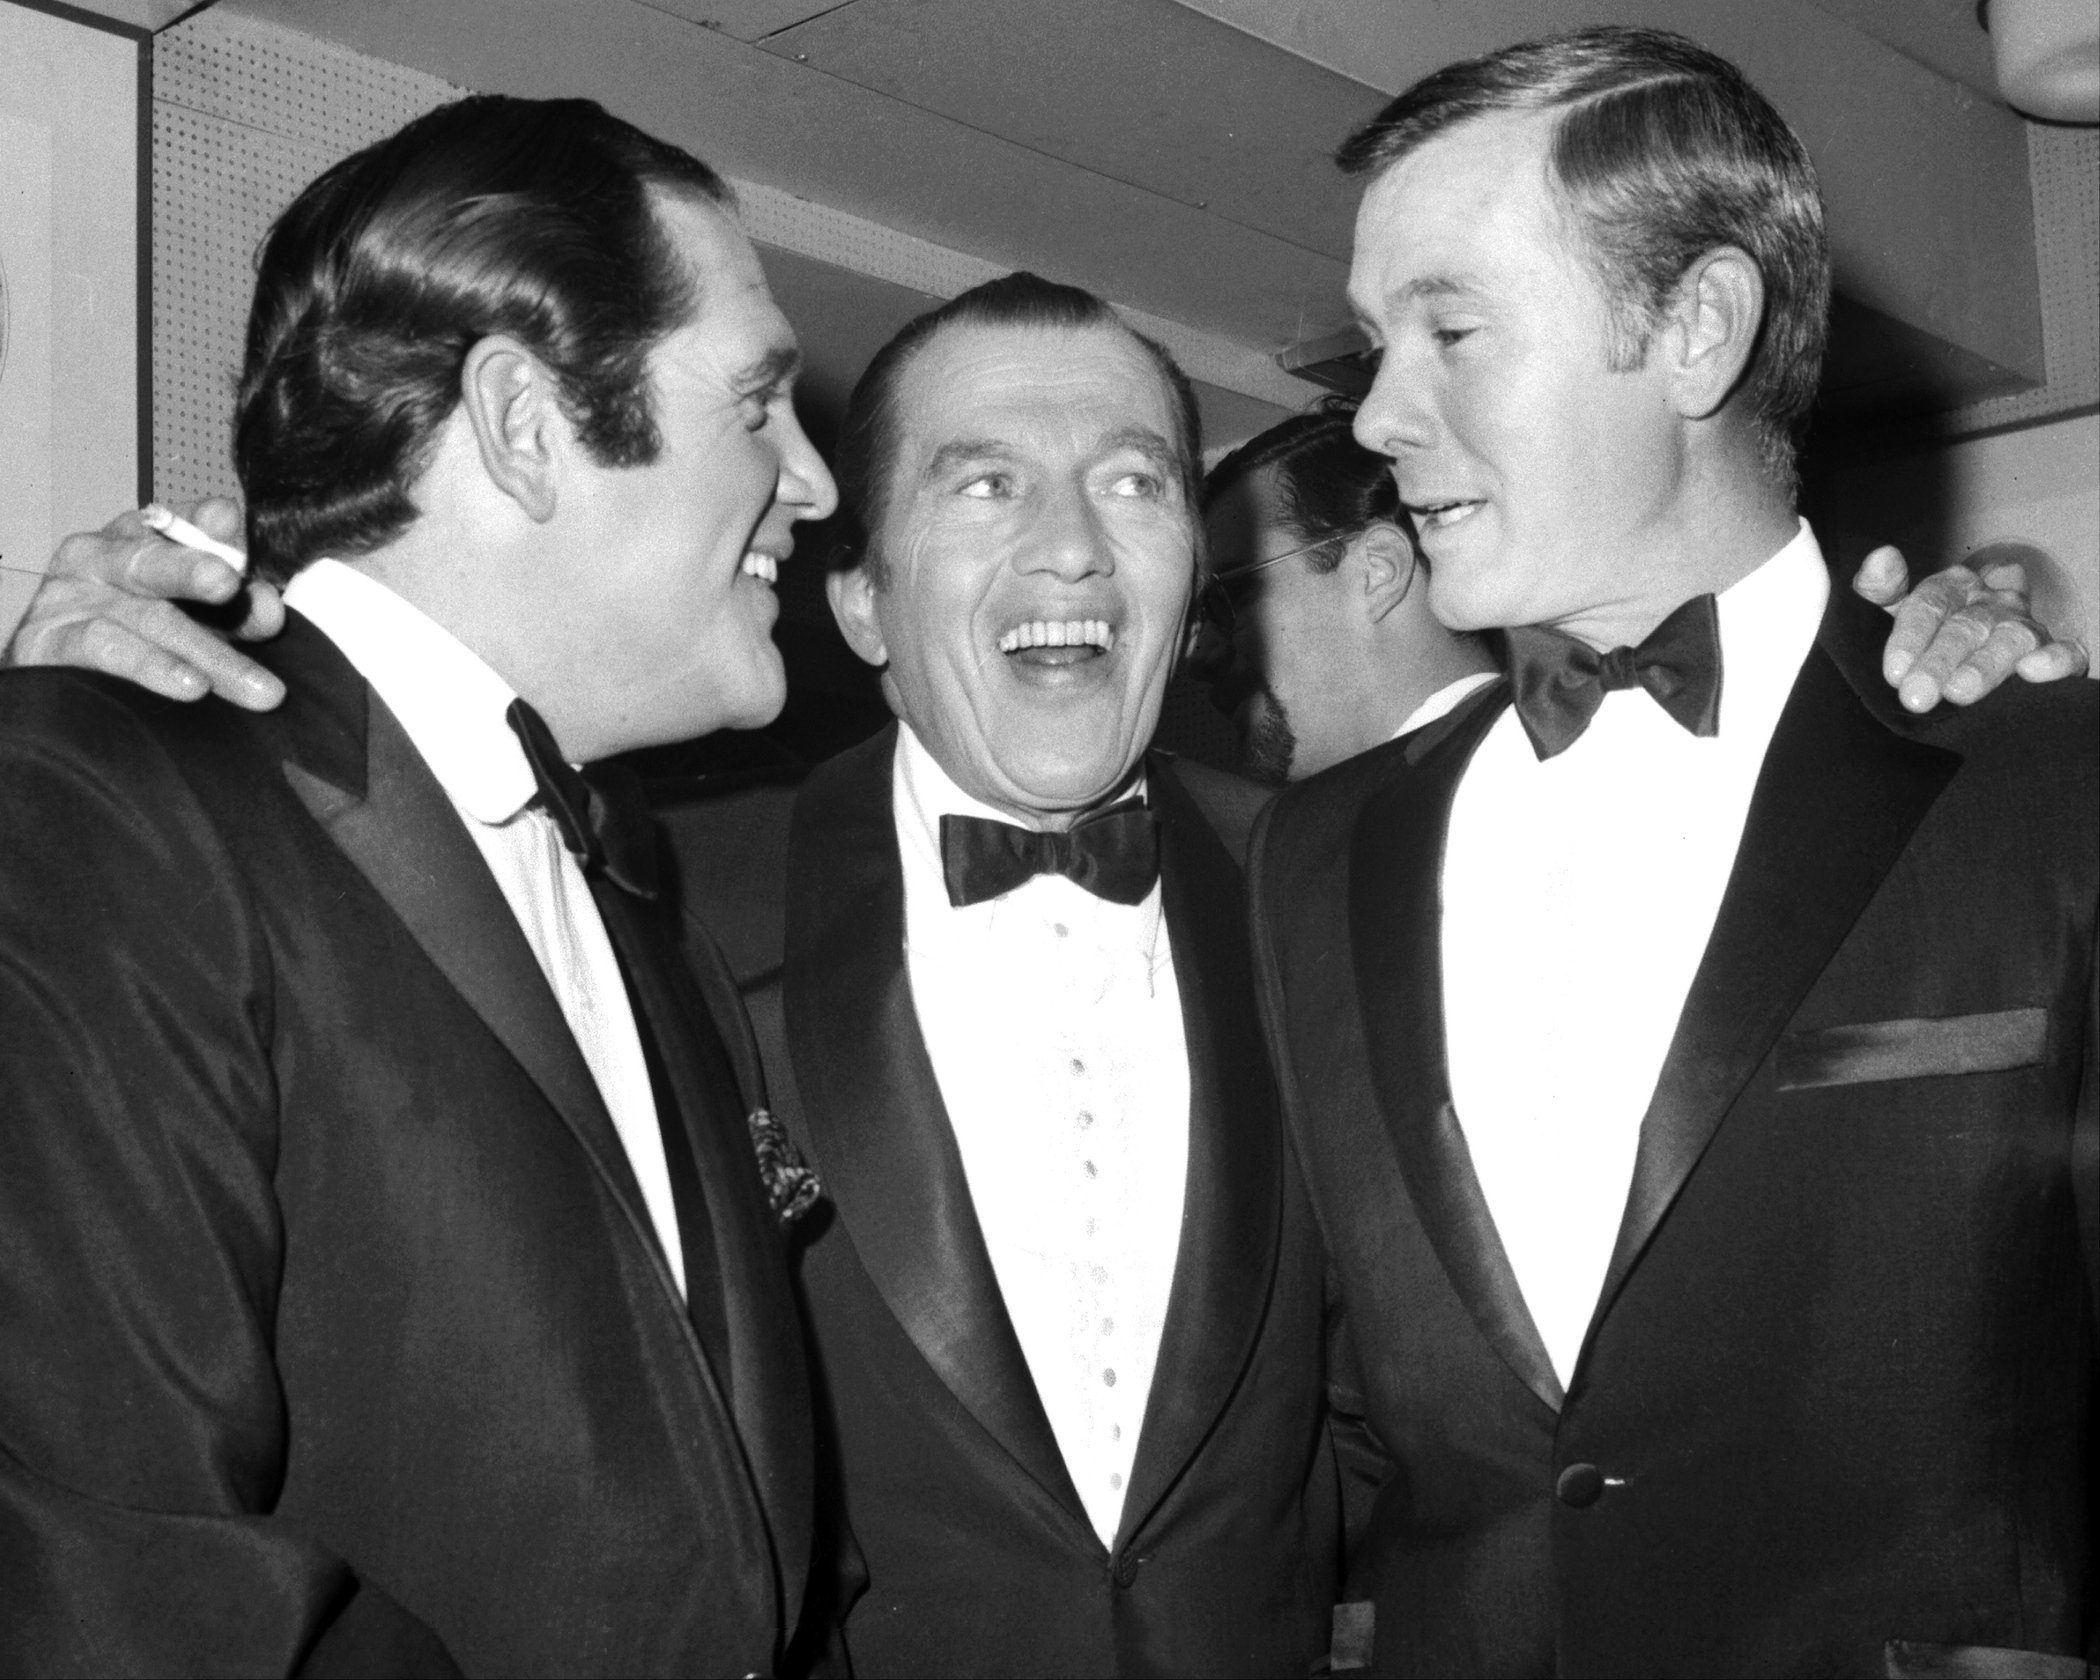 Comedian Alan King and Ed Sullivan from 'The Ed Sullivan Show'